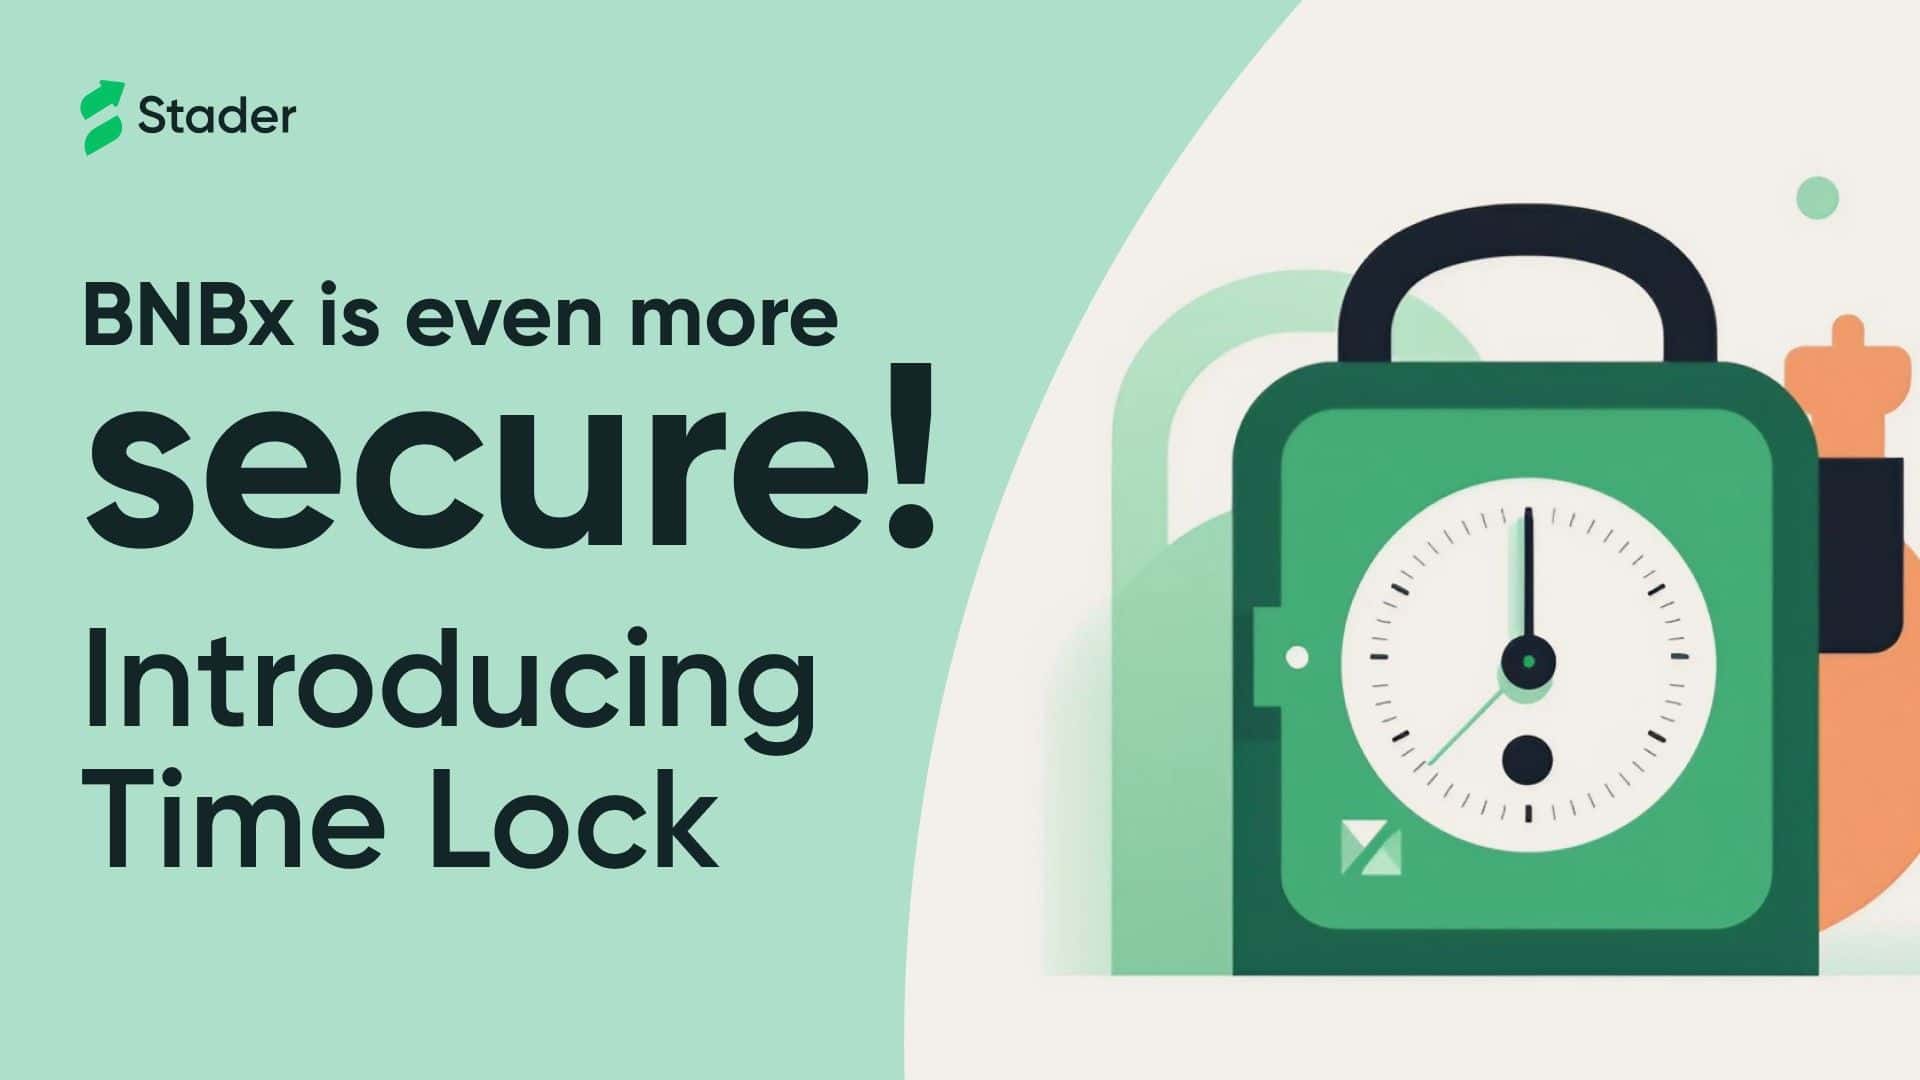 Introducing Time-Lock: Stader's latest security feature